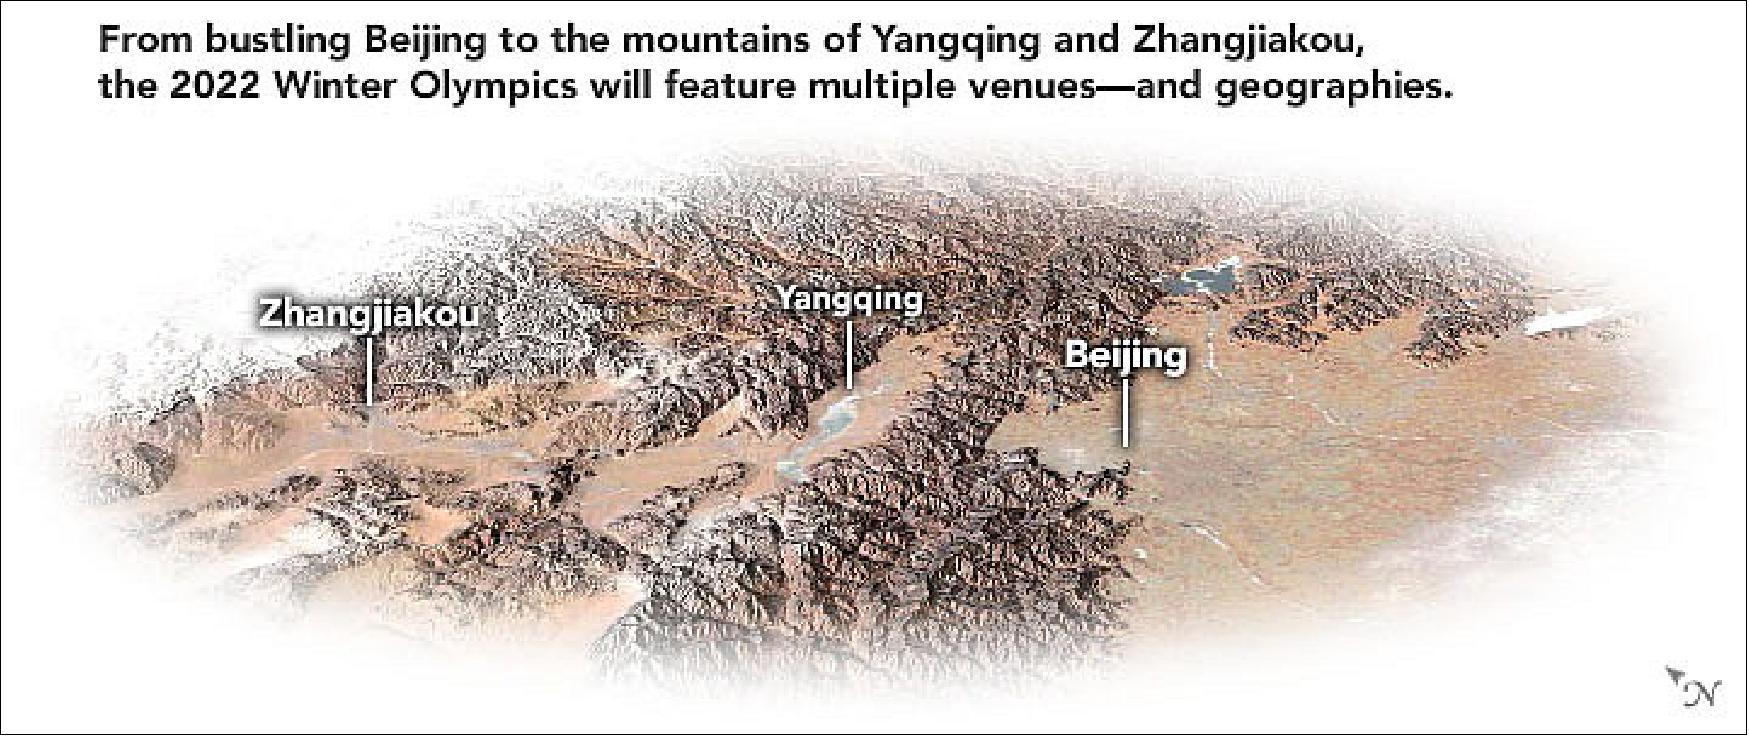 Figure 80: As shown in the three-dimensional map, the 2022 Olympic events are clustered in three zones, each with distinct geography. Alpine skiing and the sliding events (bobsled, skeleton, and luge) take place on Xiaohaituo Mountain in Yanqing, a Beijing suburb about 75 km (45 miles) northwest of the city center. Since the region only receives an average of 3.3 cm (1.3 inches) of snow most Februarys, organizers are relying on hundreds of snow machines to create enough snow for the skiing events. To create the 3D map, a natural-color image captured by the Moderate Resolution Imaging Spectroradiometer (MODIS) satellite sensor on February 1, 2021, was overlaid on a digital elevation model from the Shuttle Radar Topography Mission (SRTM), [image credit: NASA Earth Observatory images by Joshua Stevens, using Landsat data from the U.S. Geological Survey, topographic data from the Shuttle Radar Topography Mission (SRTM), and MODIS data from NASA EOSDIS LANCE and GIBS/Worldview. Story by Adam Voiland]